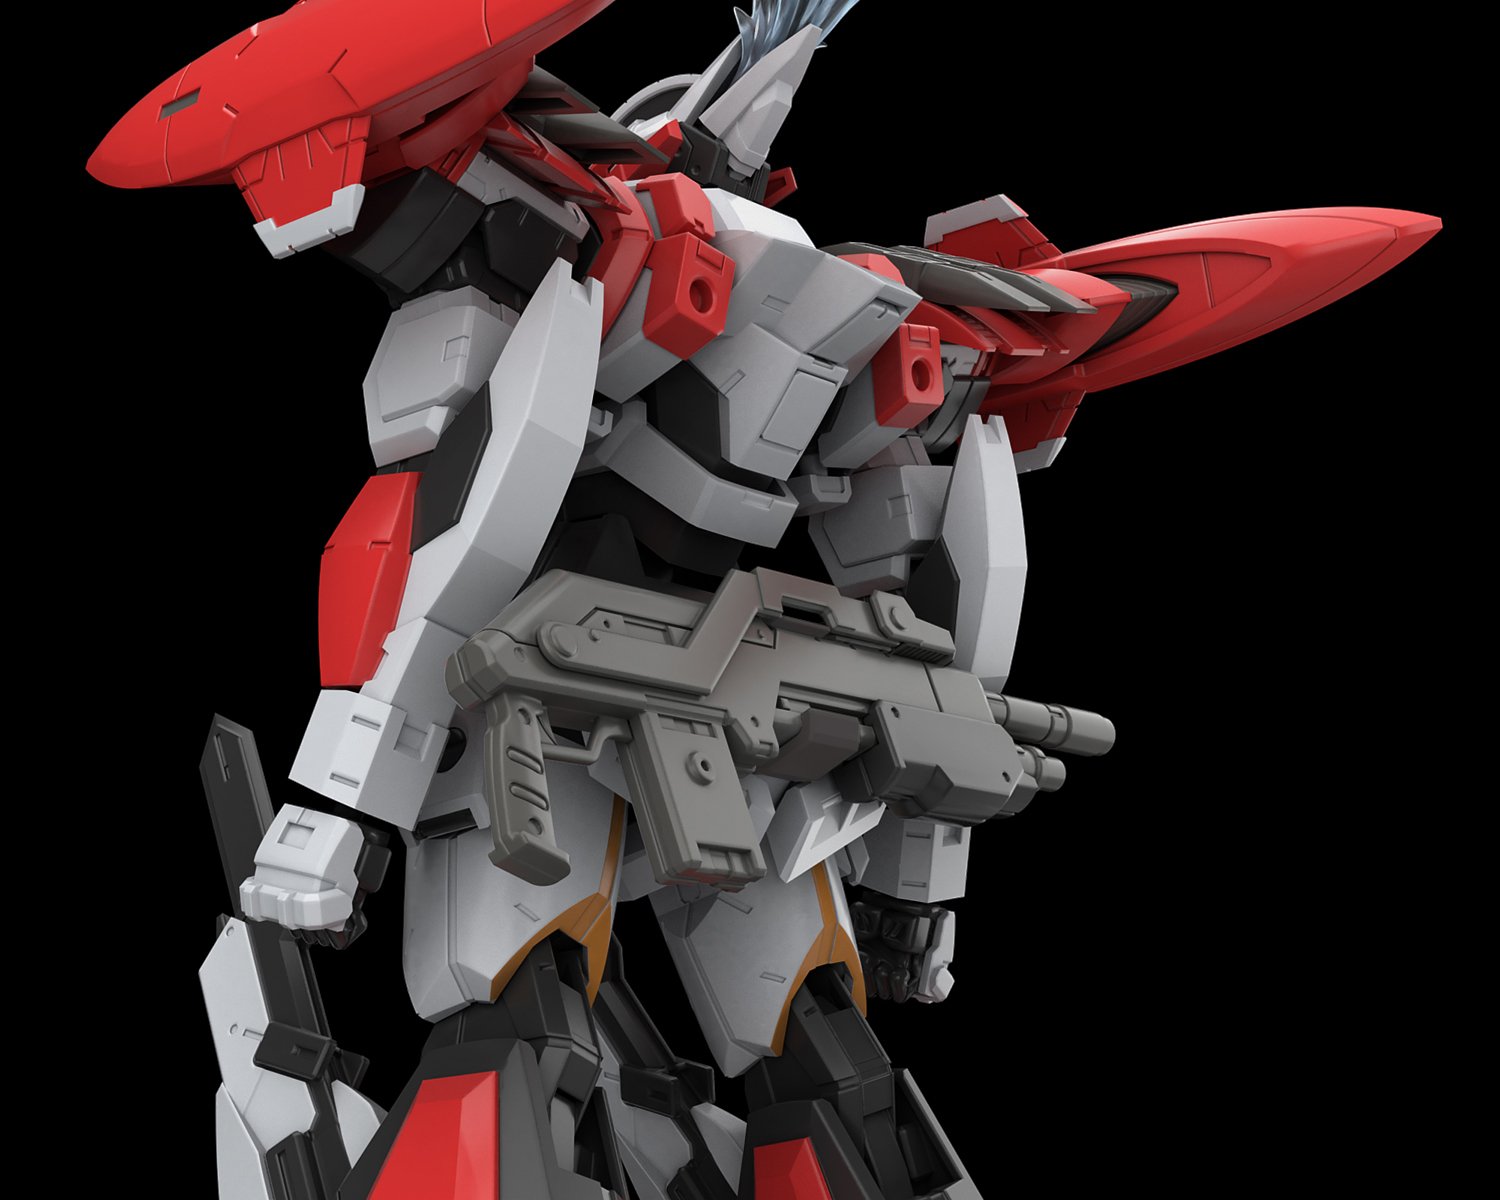 Aoshima - Full Metal Panic! Invisible Victory - ARX-8 Laevatein Final Battle Ver. Model Kit (1/48 Scale) - Marvelous Toys